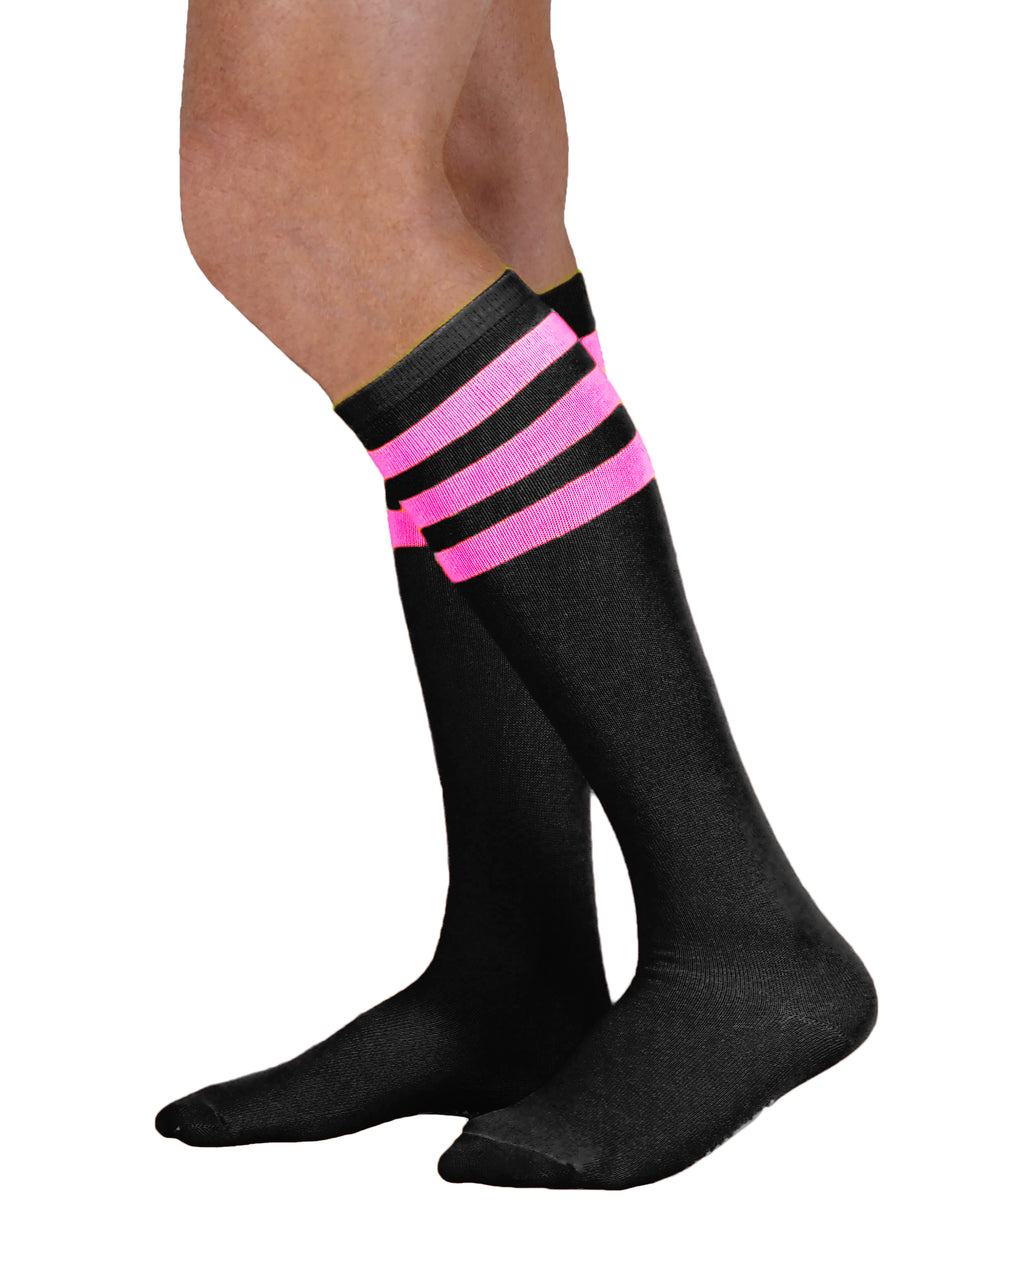 Unisex adult size black knee high tube sock with three neon hot pink stripes